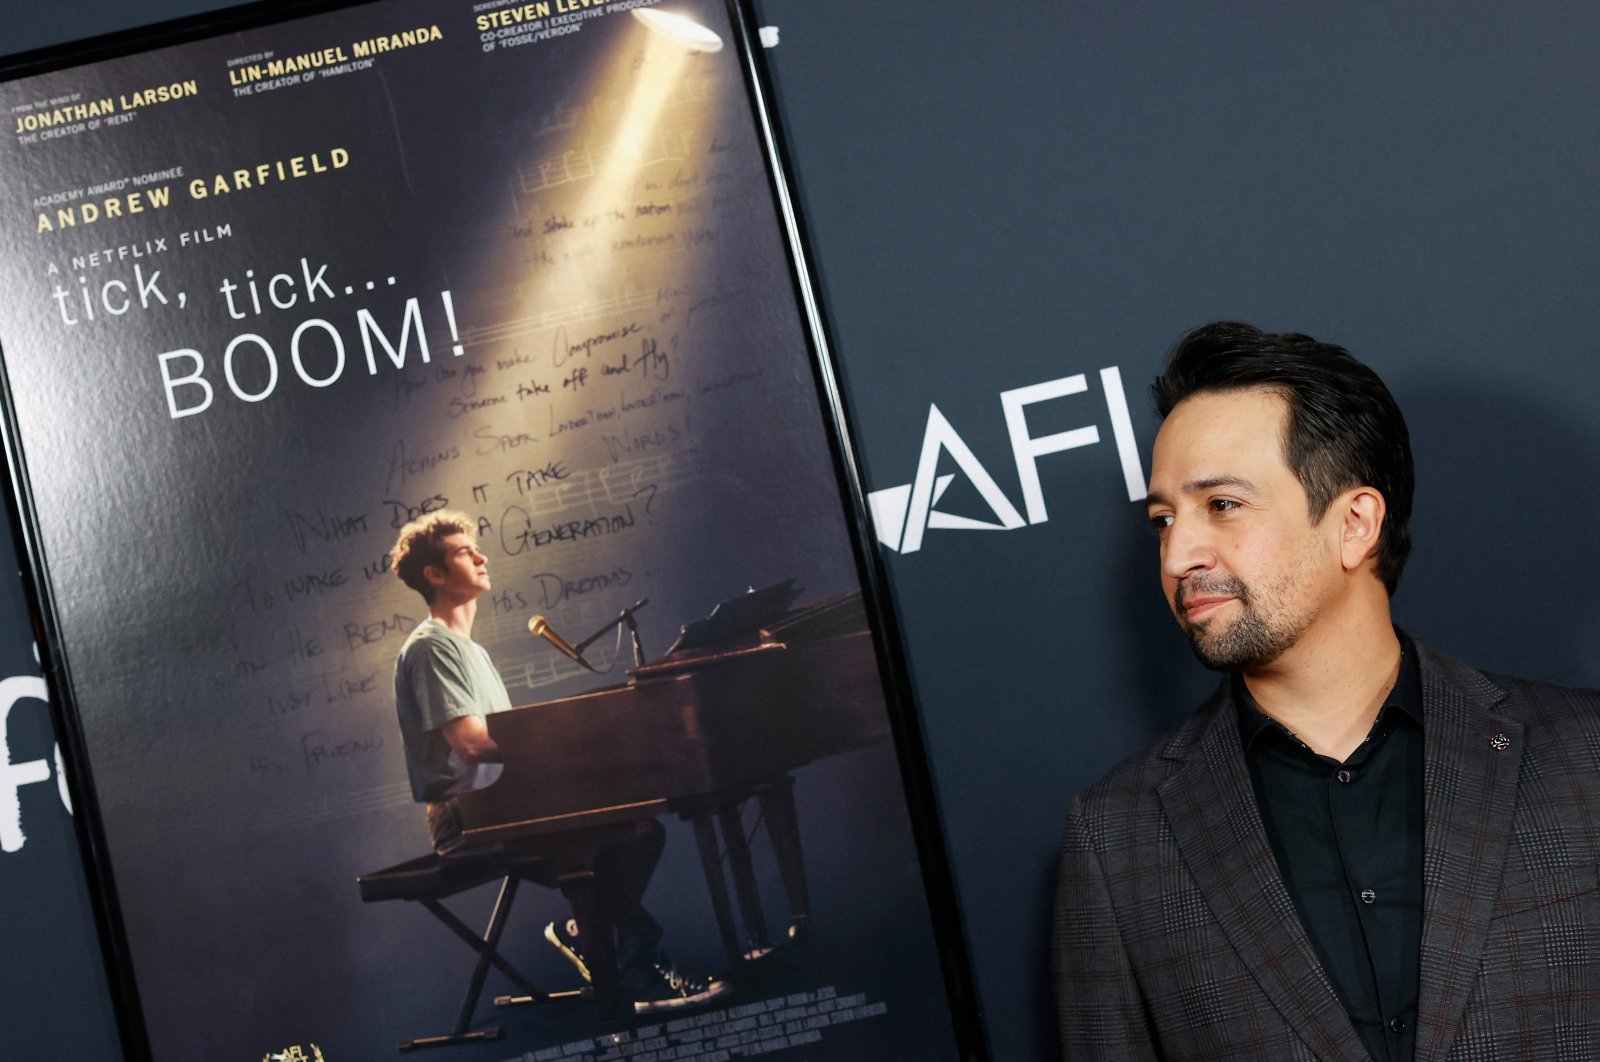 Director Lin-Manuel Miranda attends the world premiere of "tick, tick…BOOM!" on the opening night of AFI Fest at the TCL Chinese Theater in Los Angeles, U.S., Nov. 10, 2021. (AFP Photo)